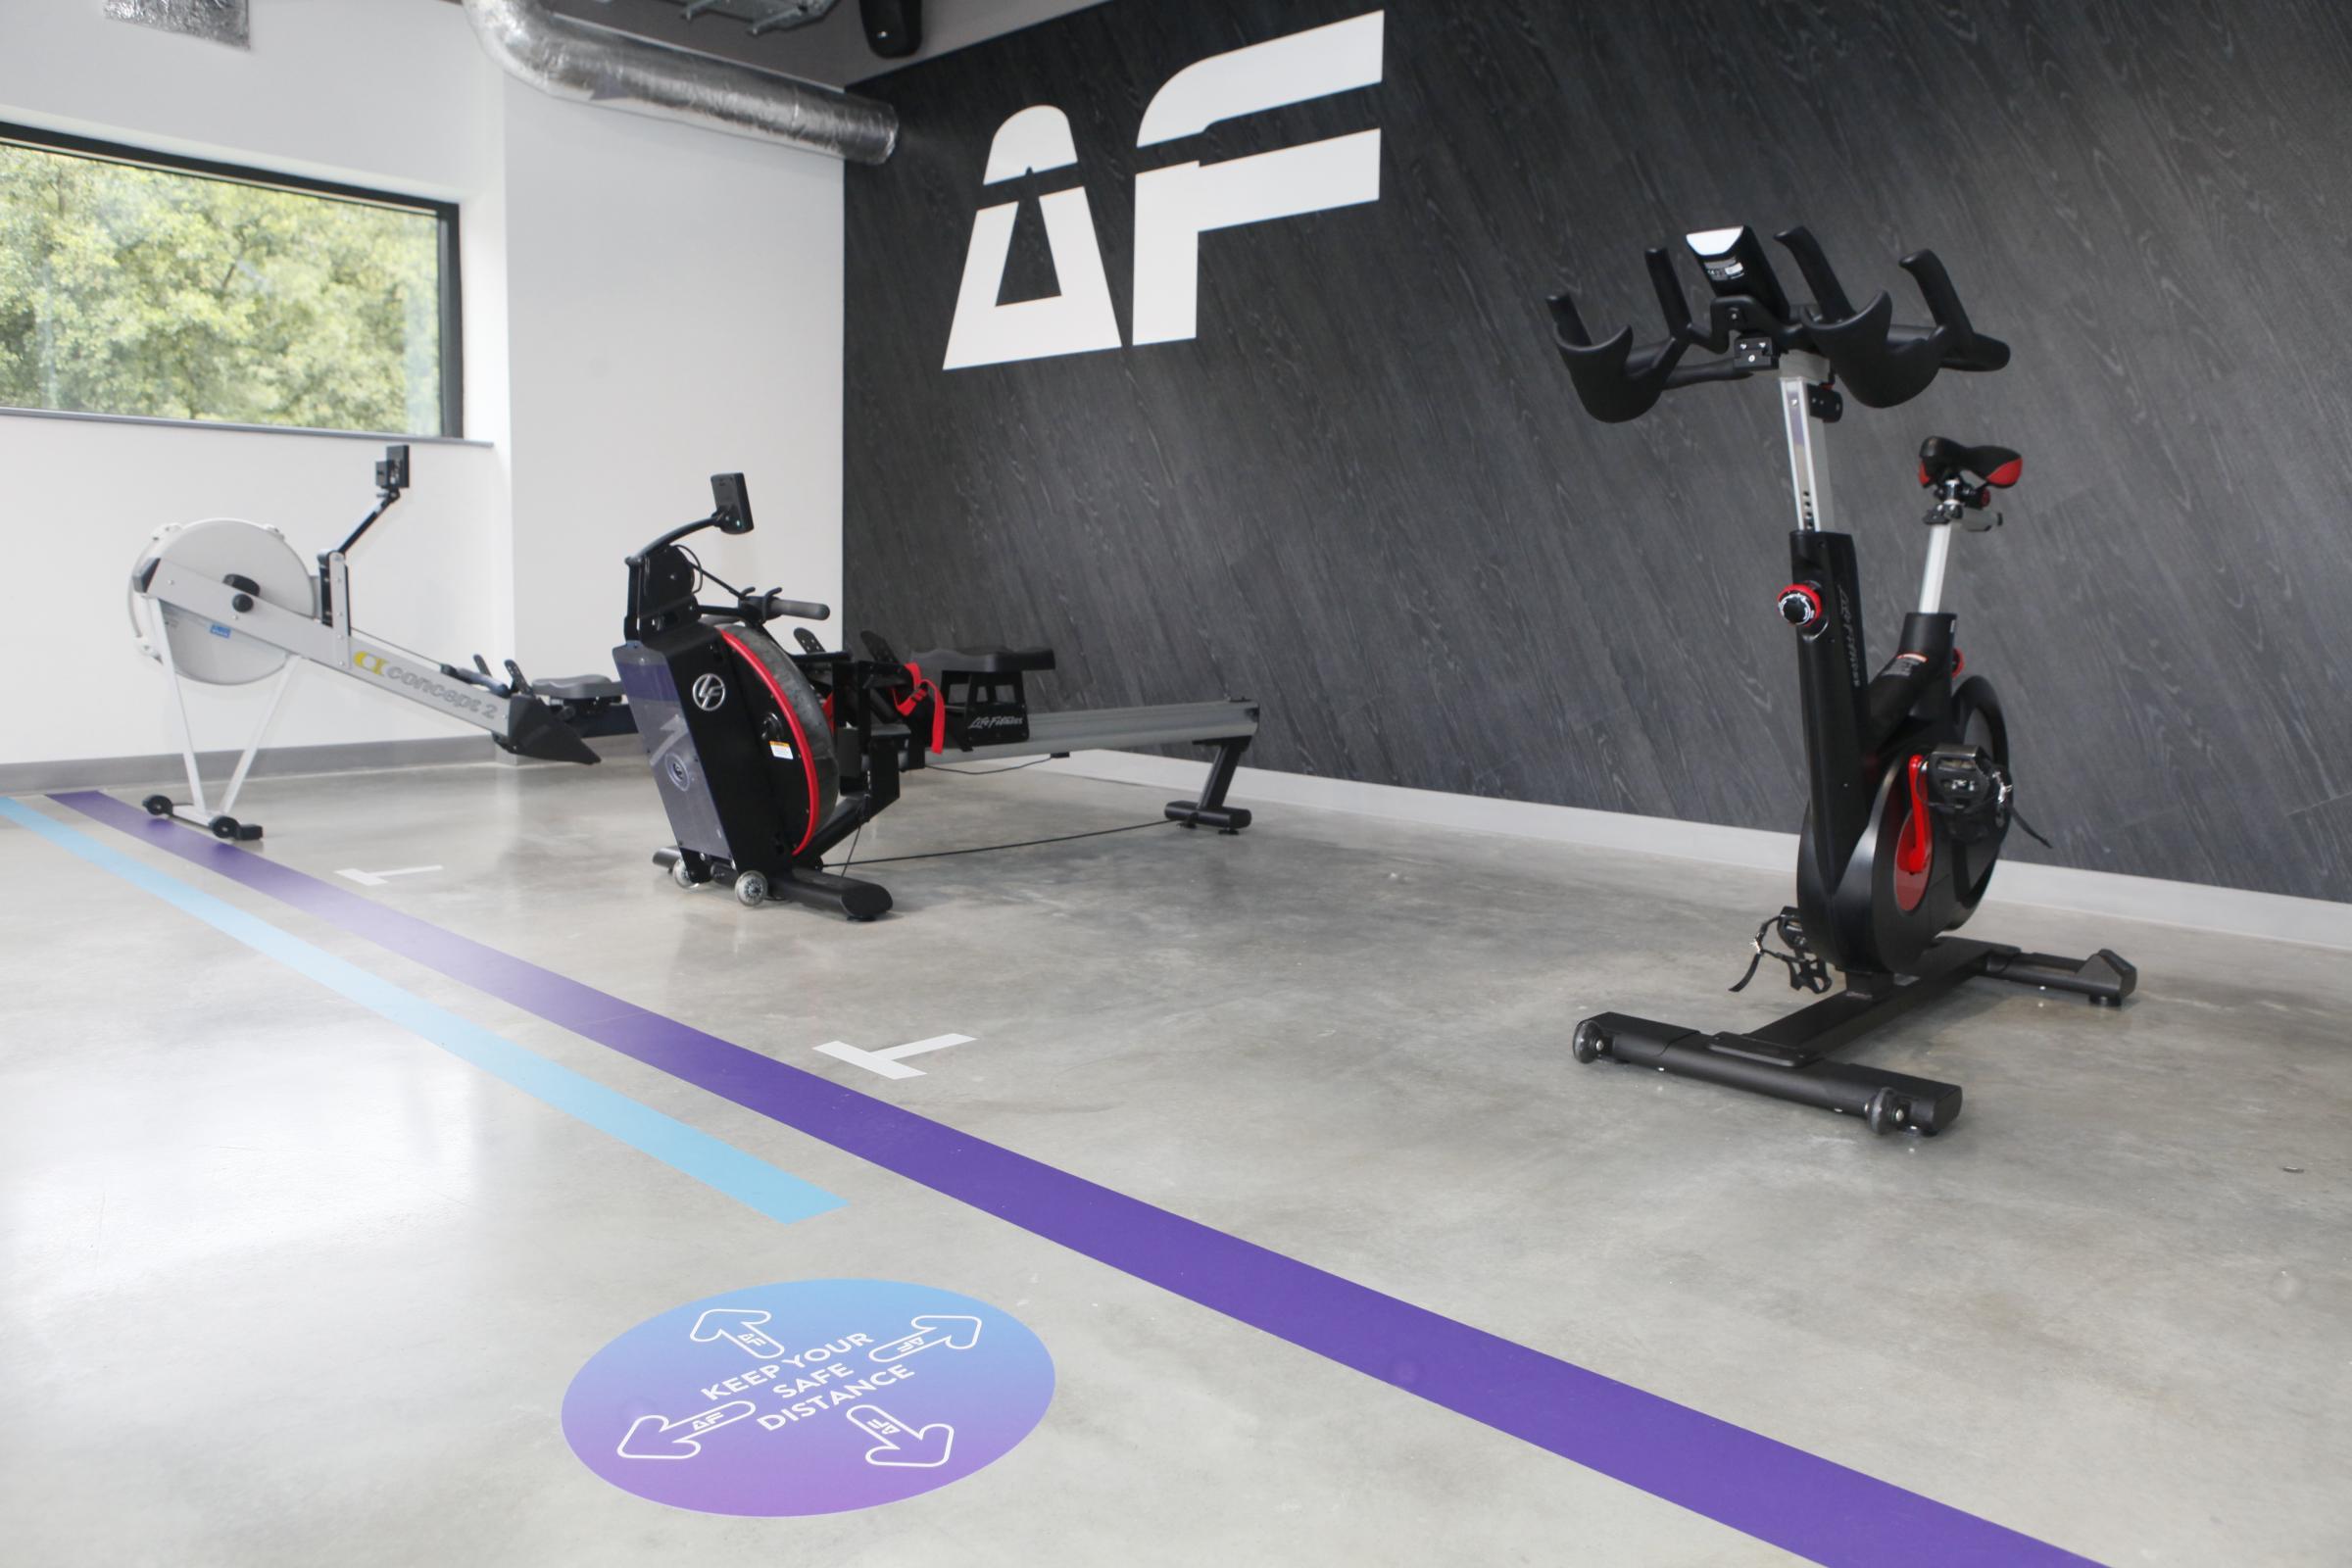 The gym offers several different facilities (photo from Anytime Fitness)